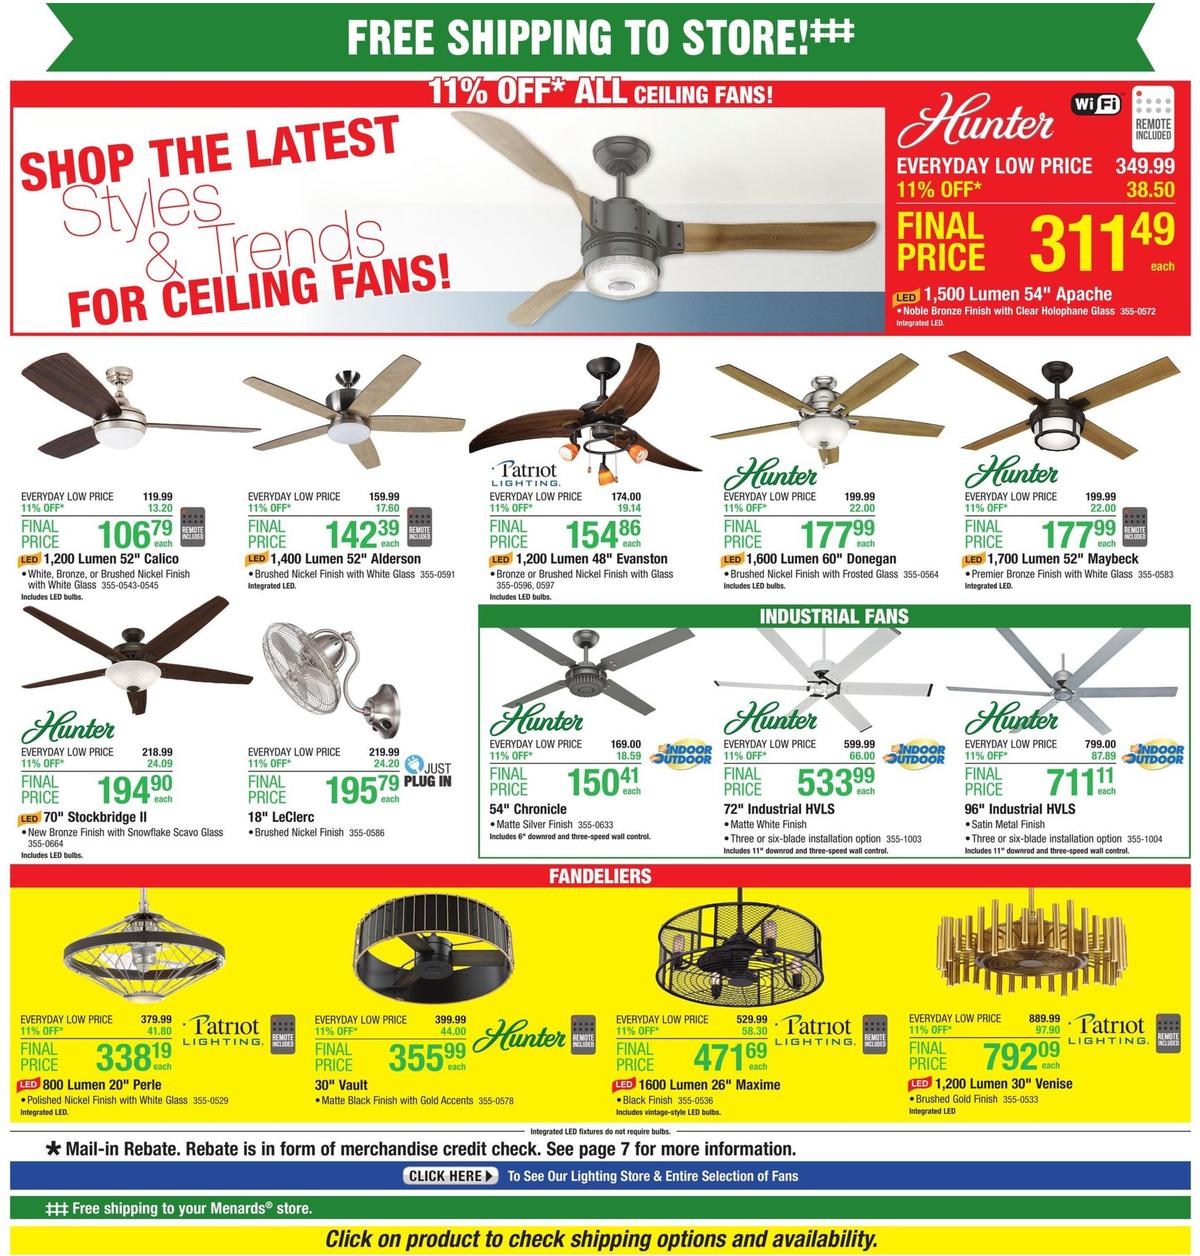 Menards Weekly Ad from March 22